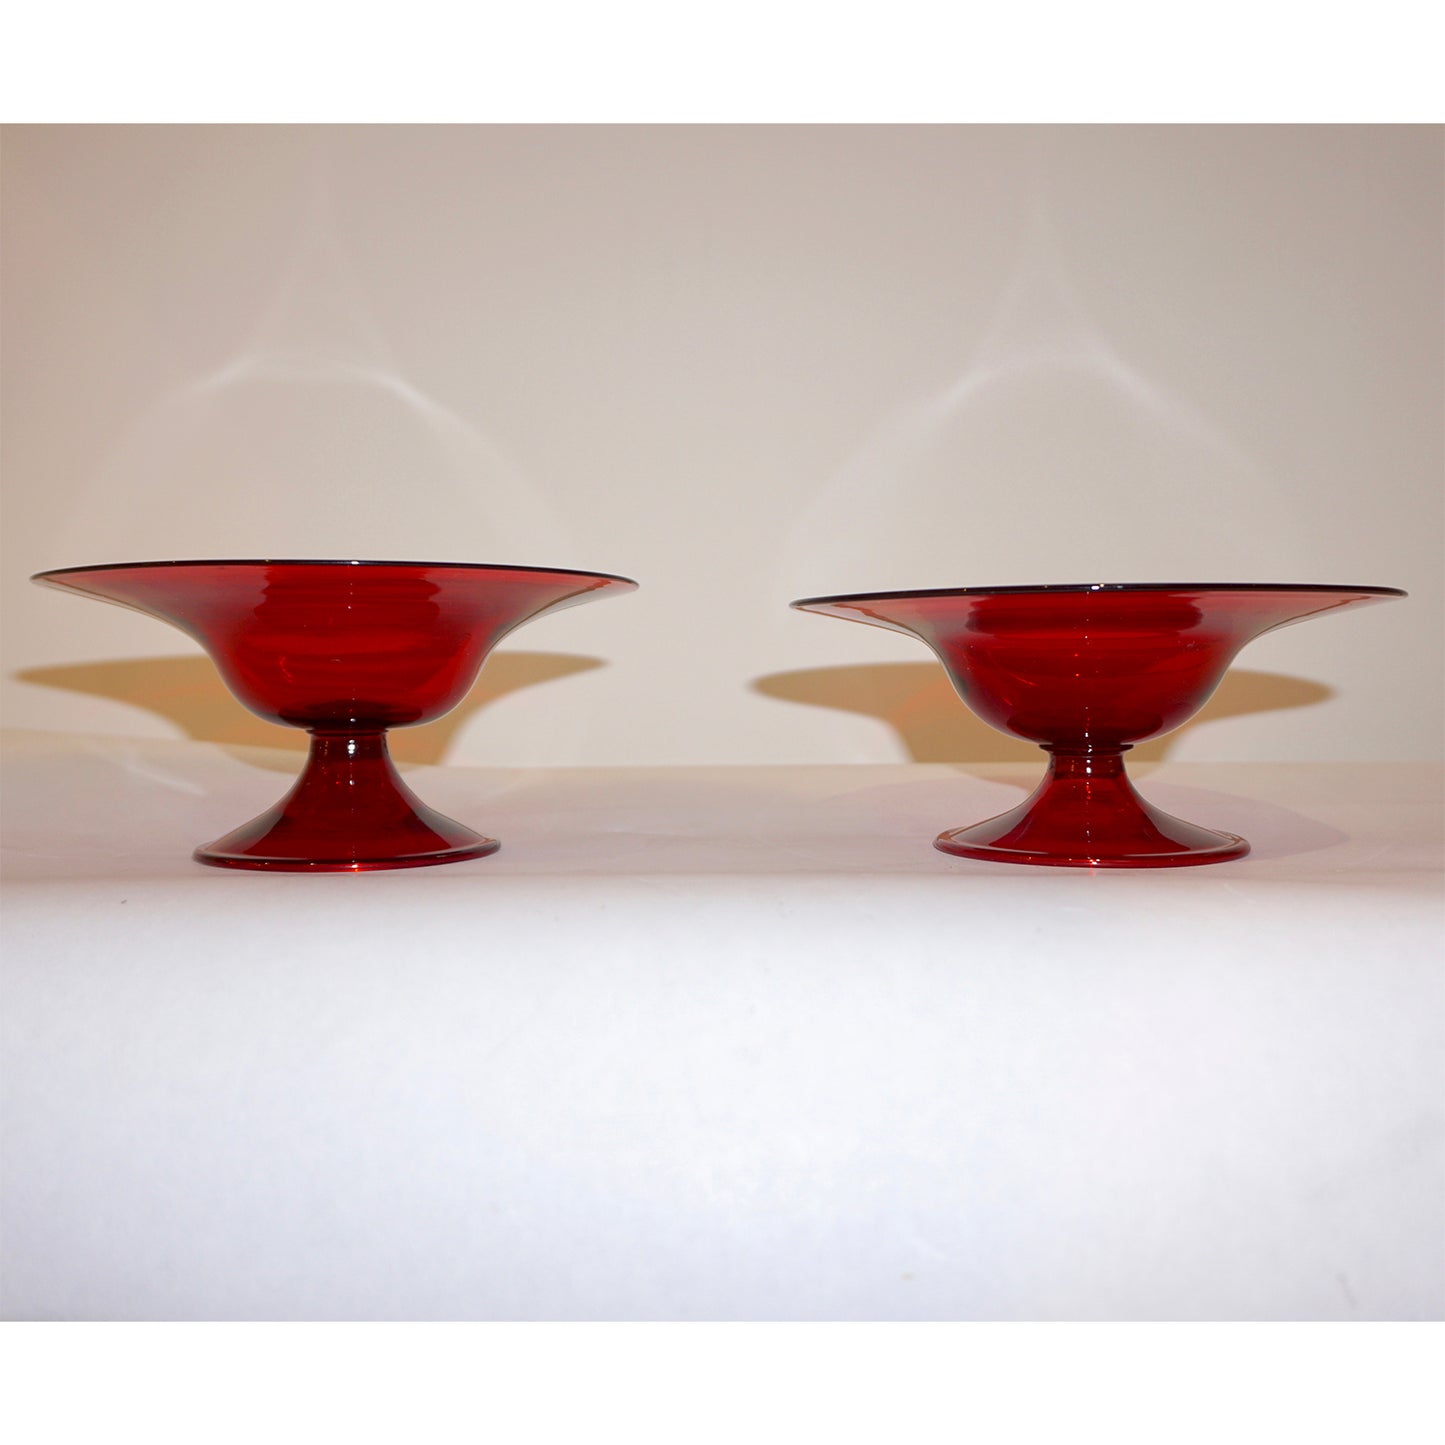 Salviati 1940s Italian Pair of Antique Ruby Red Blown Murano Glass Compote Bowls